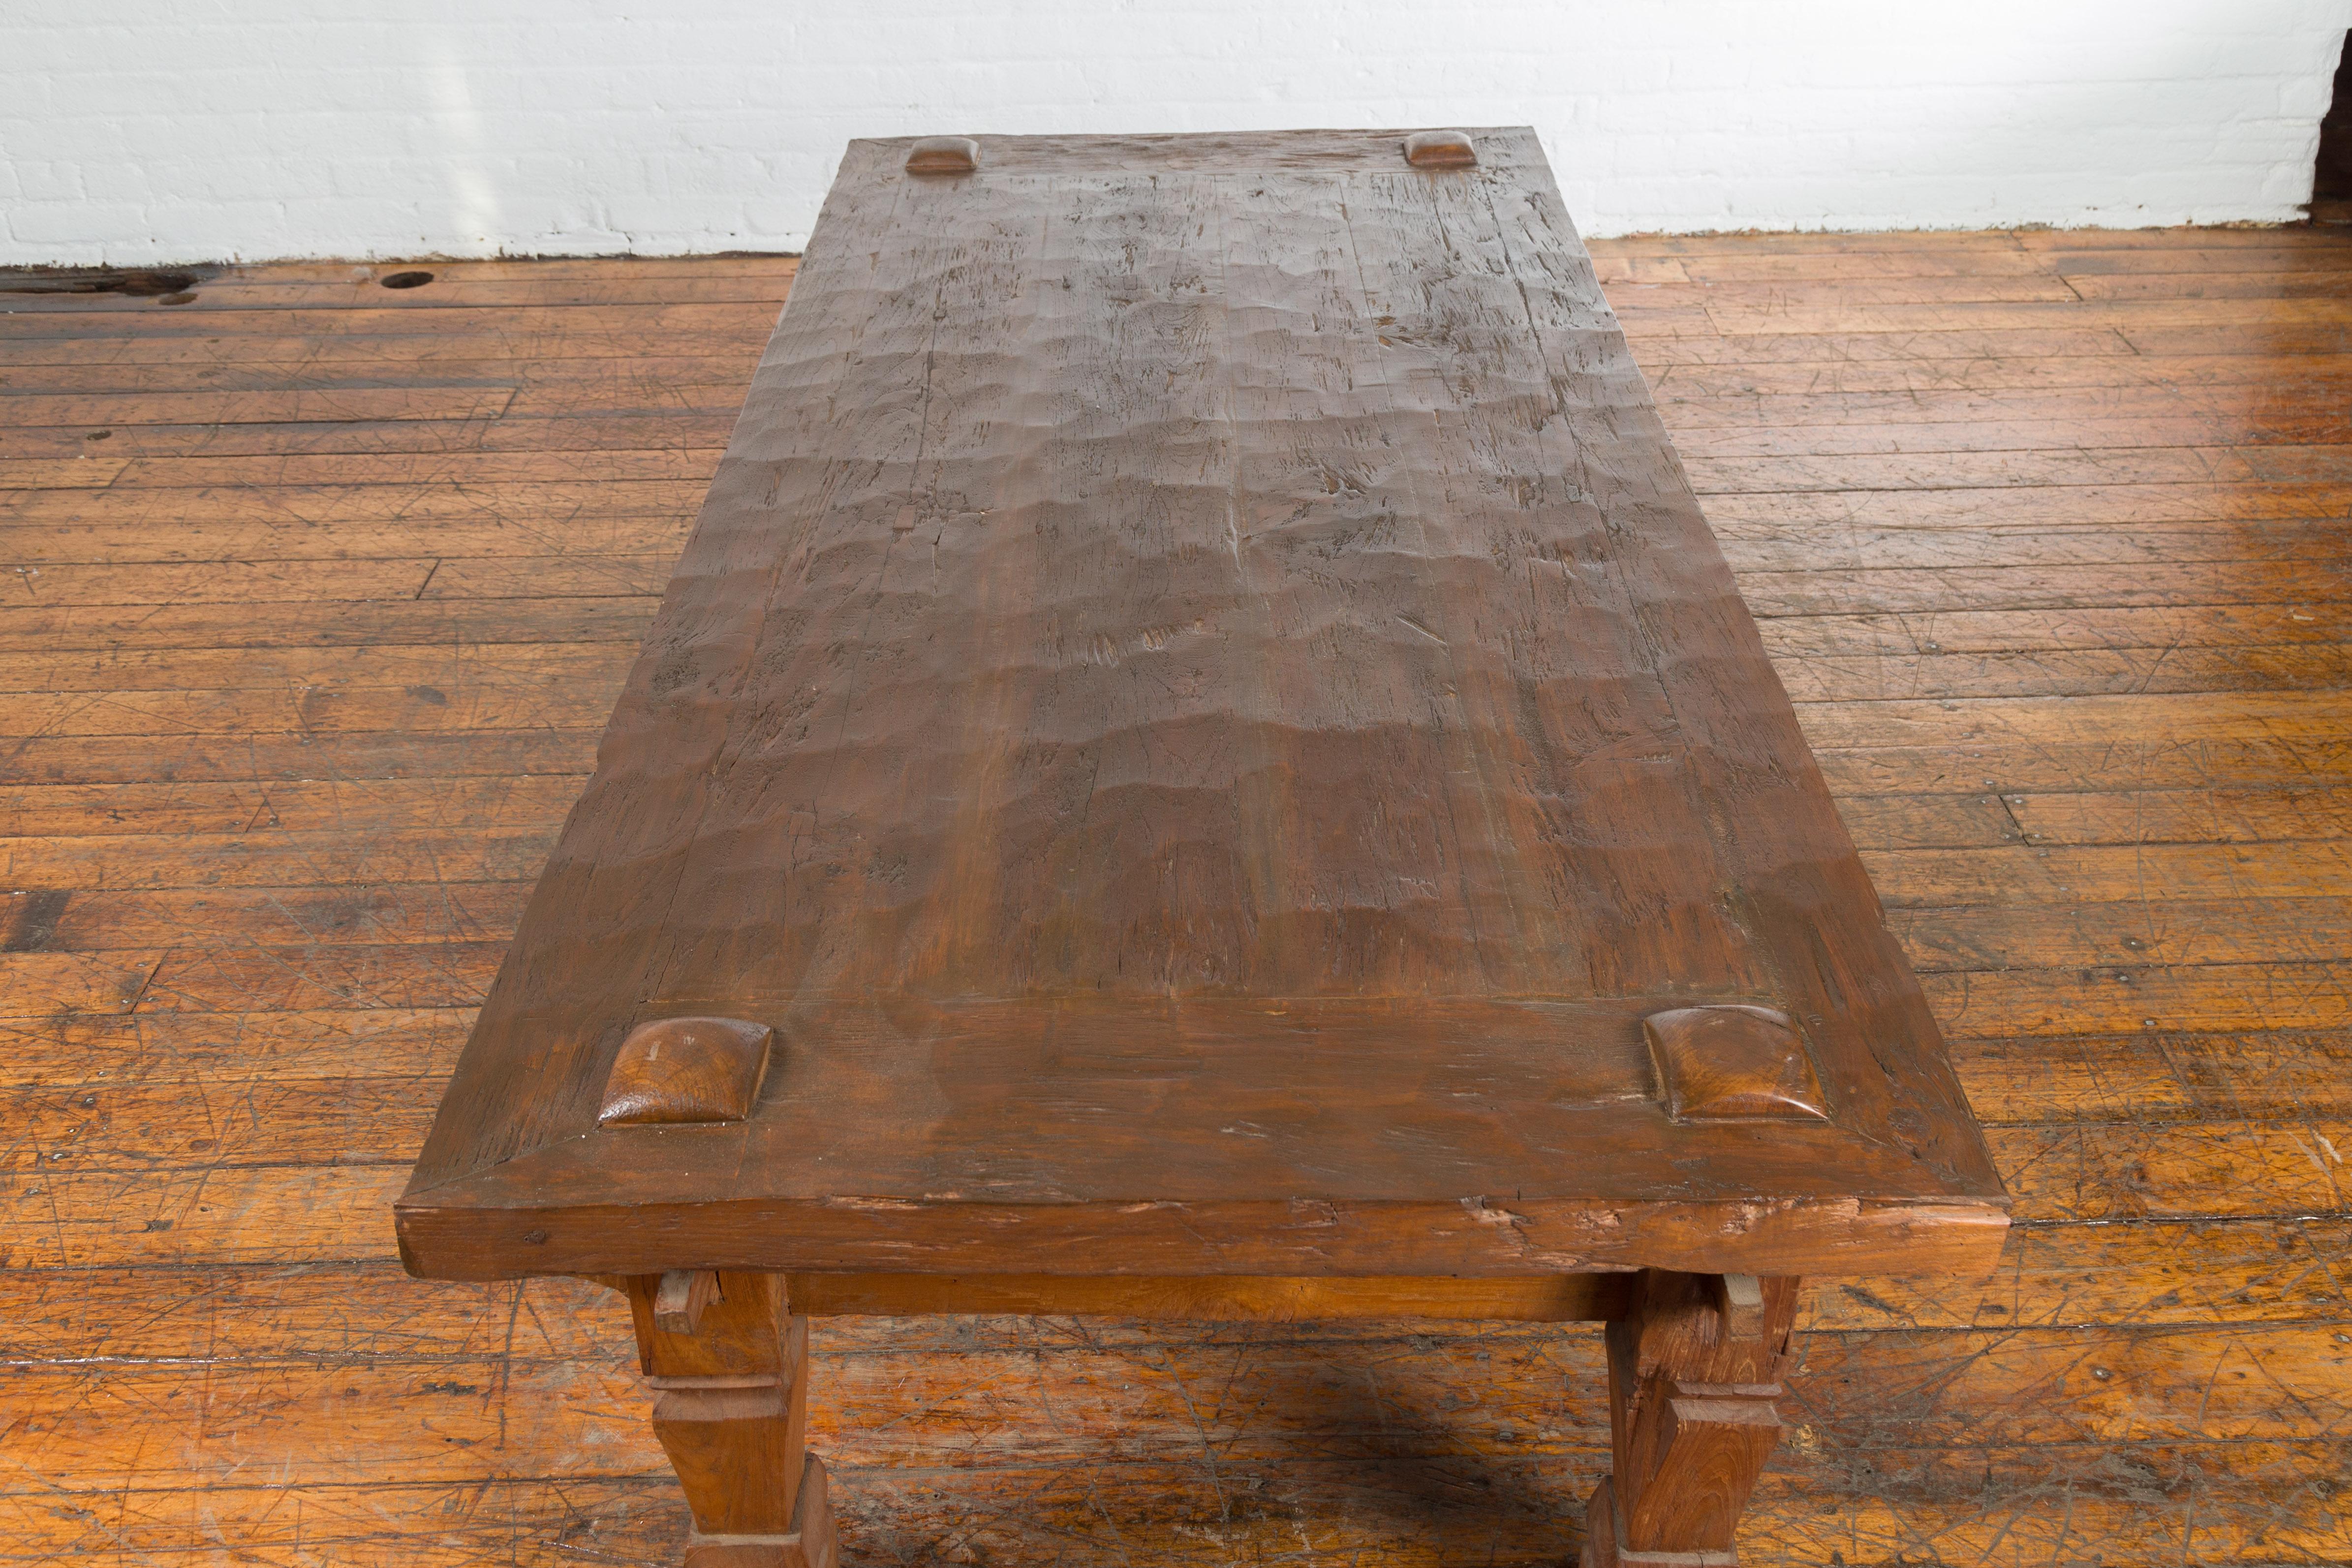 19th Century Indonesian Madurese Coffee Table with Carved Legs and Raised Joints For Sale 3